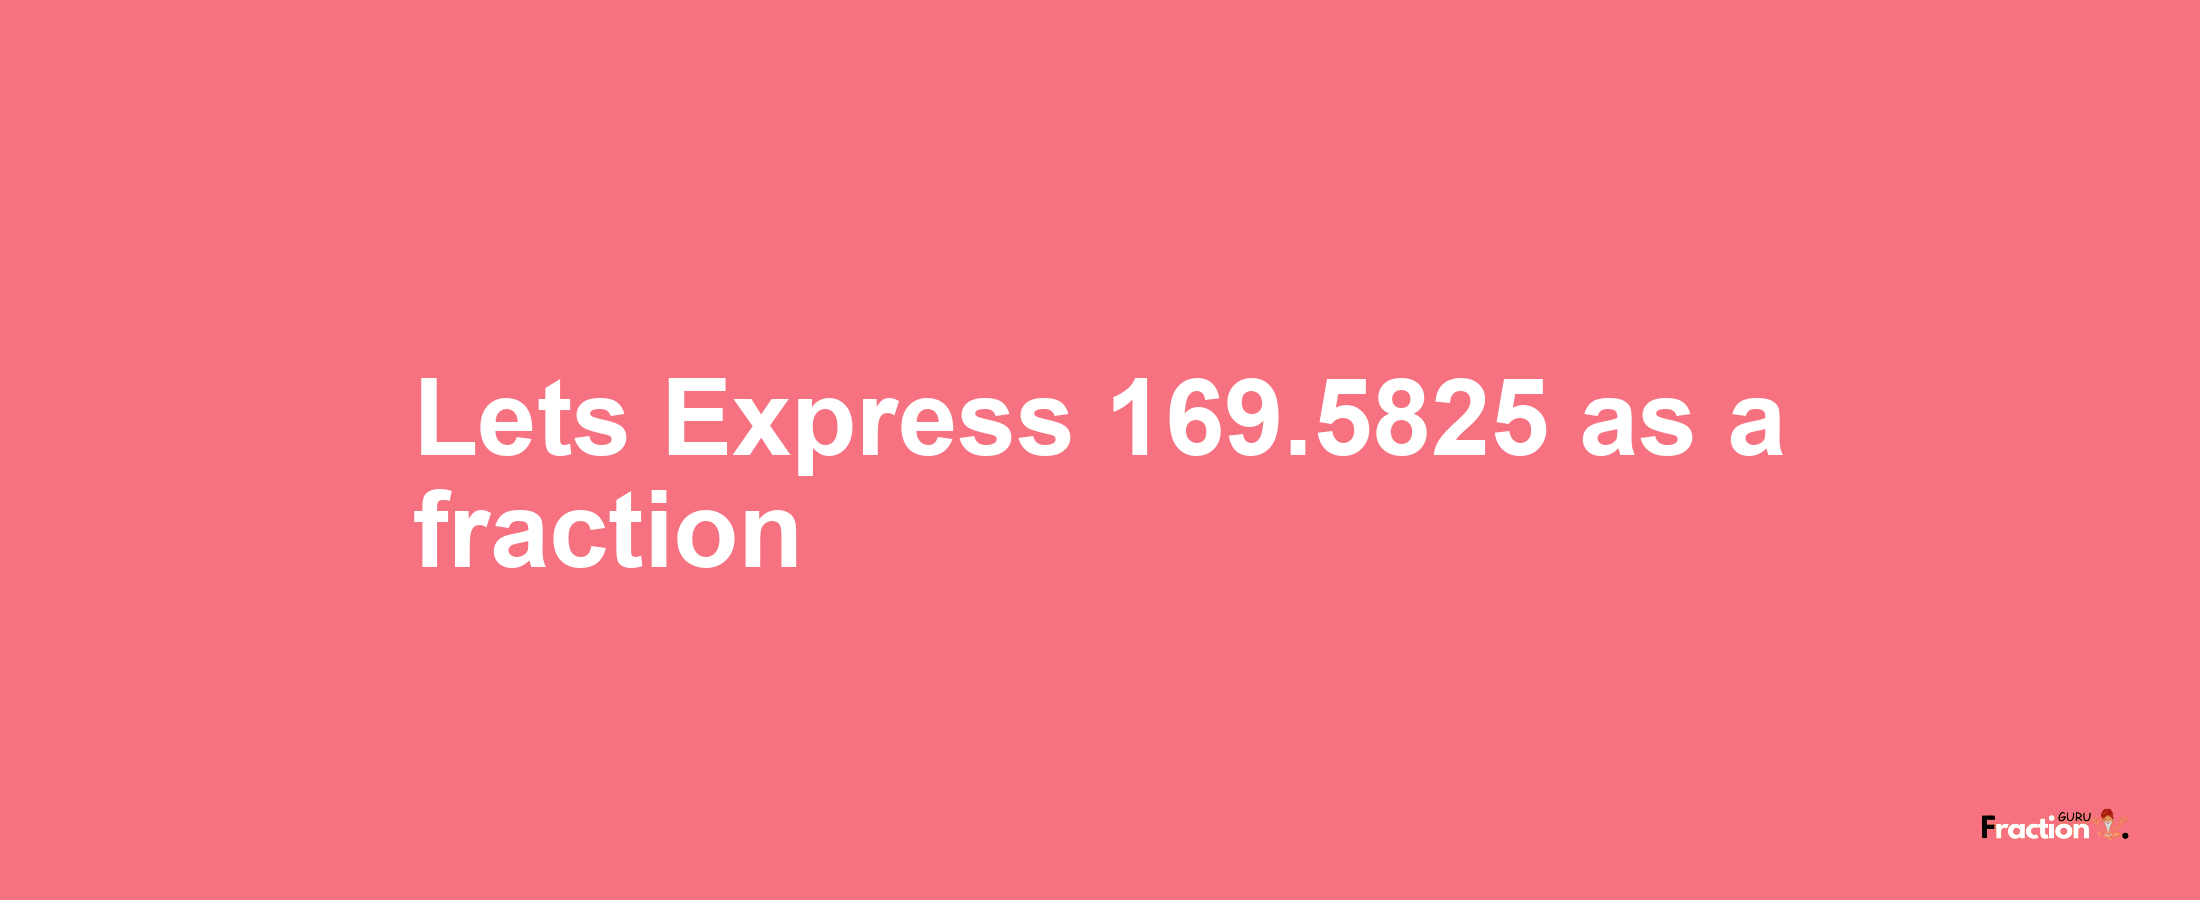 Lets Express 169.5825 as afraction